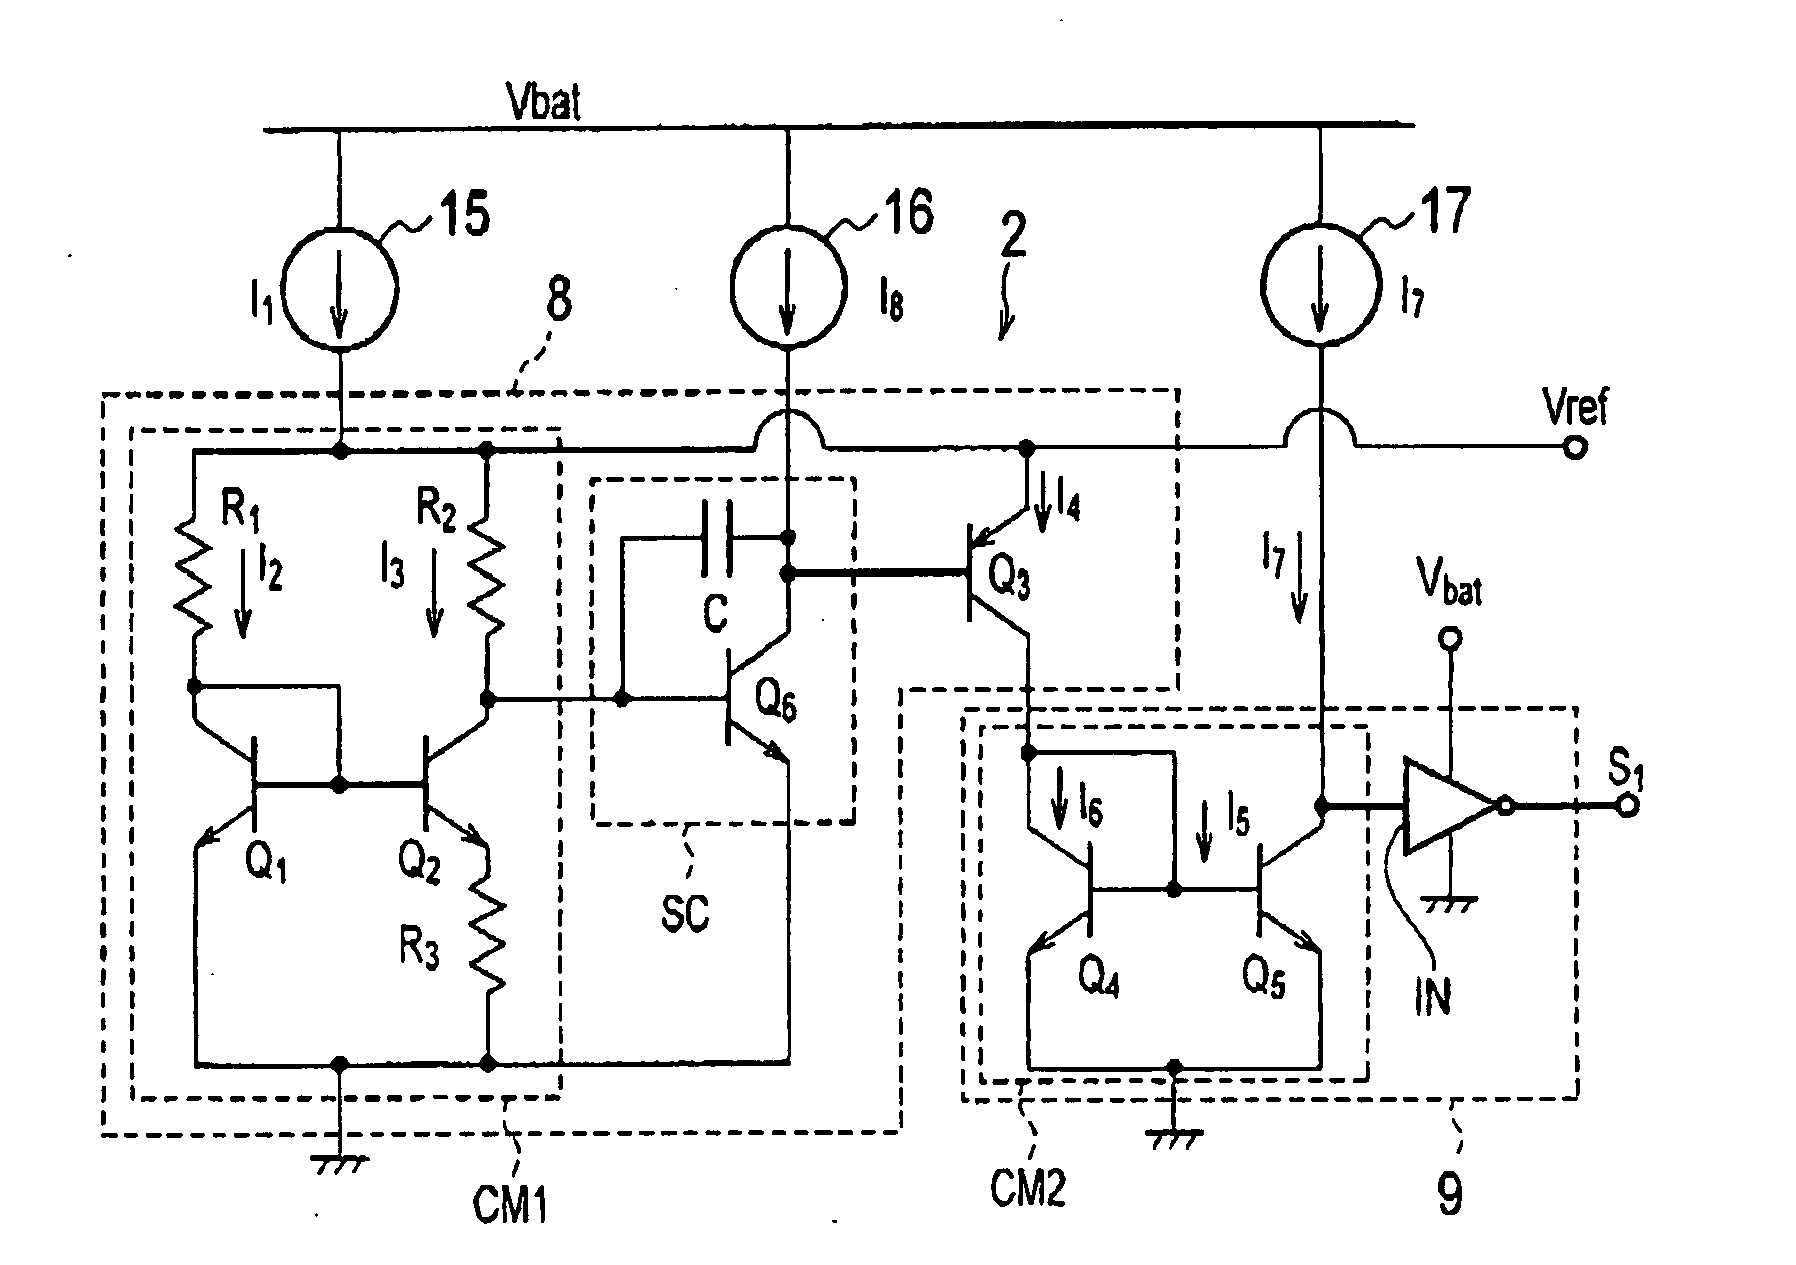 Voltage generator and power supply circuit